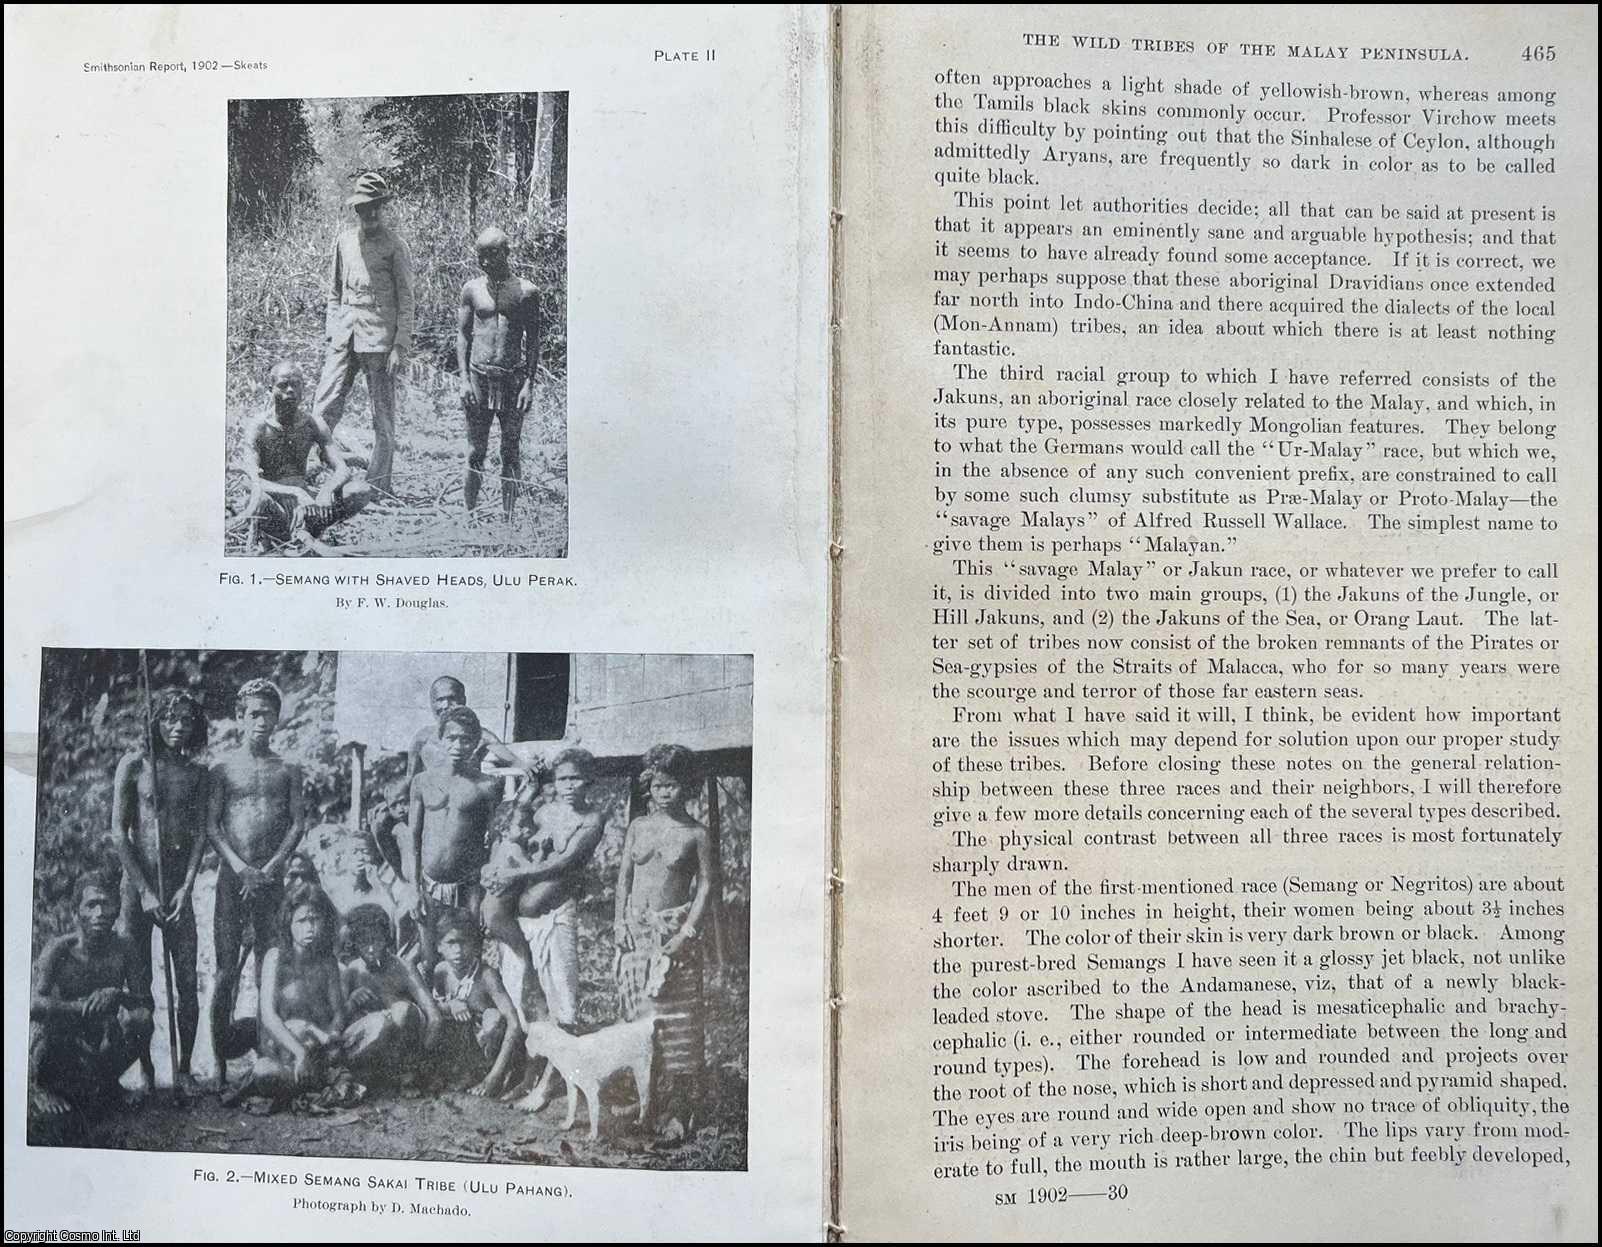 TRIBES, MALAY PENINSULA - Wild Tribes of The Malay Peninsula. By W.W. Skeat, M.A. An original article from the Report of the Smithsonian Institution, 1902.